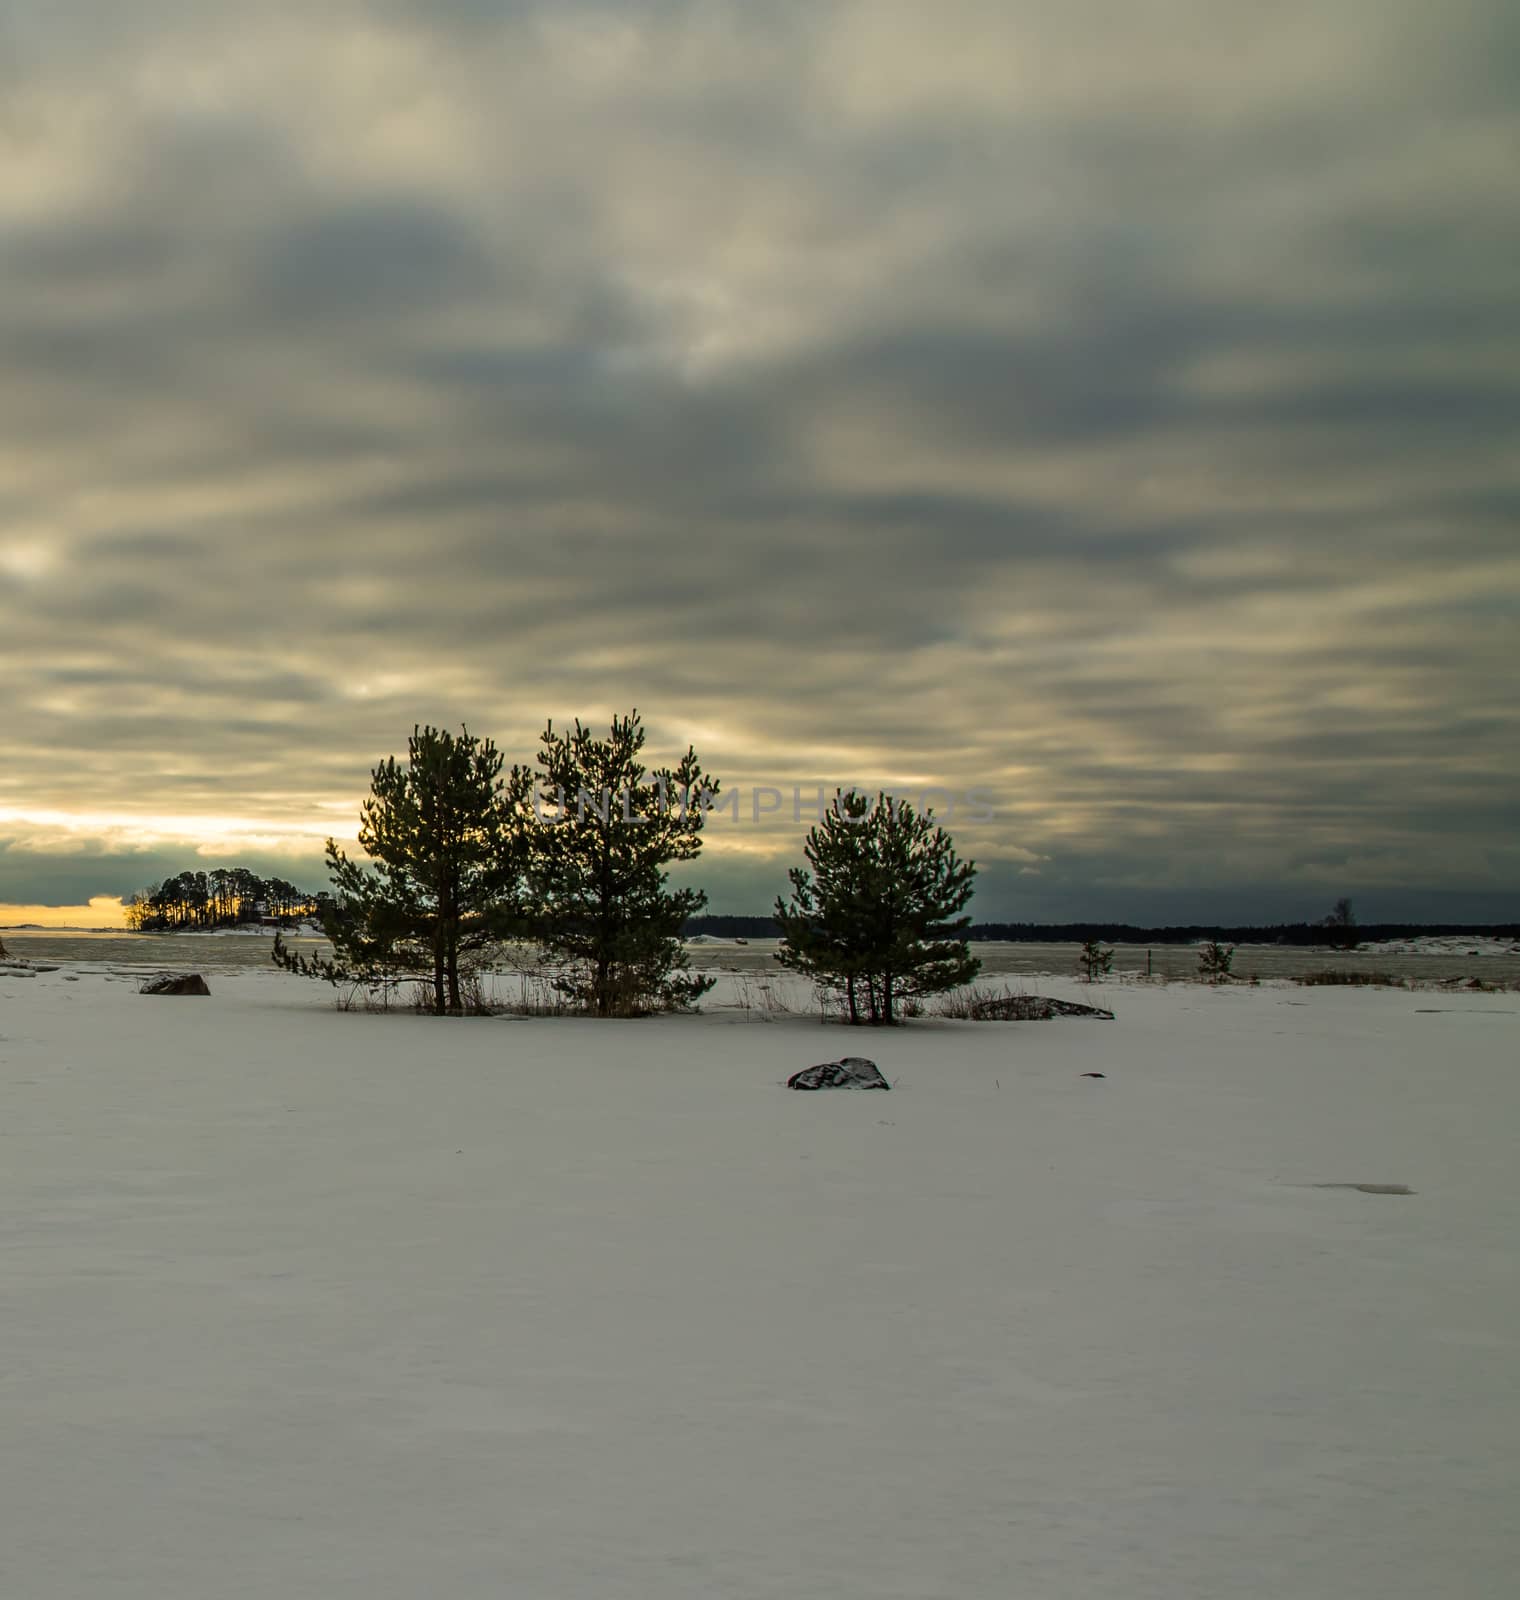 Trees on the snowy oceanshore  by Alexanderphoto